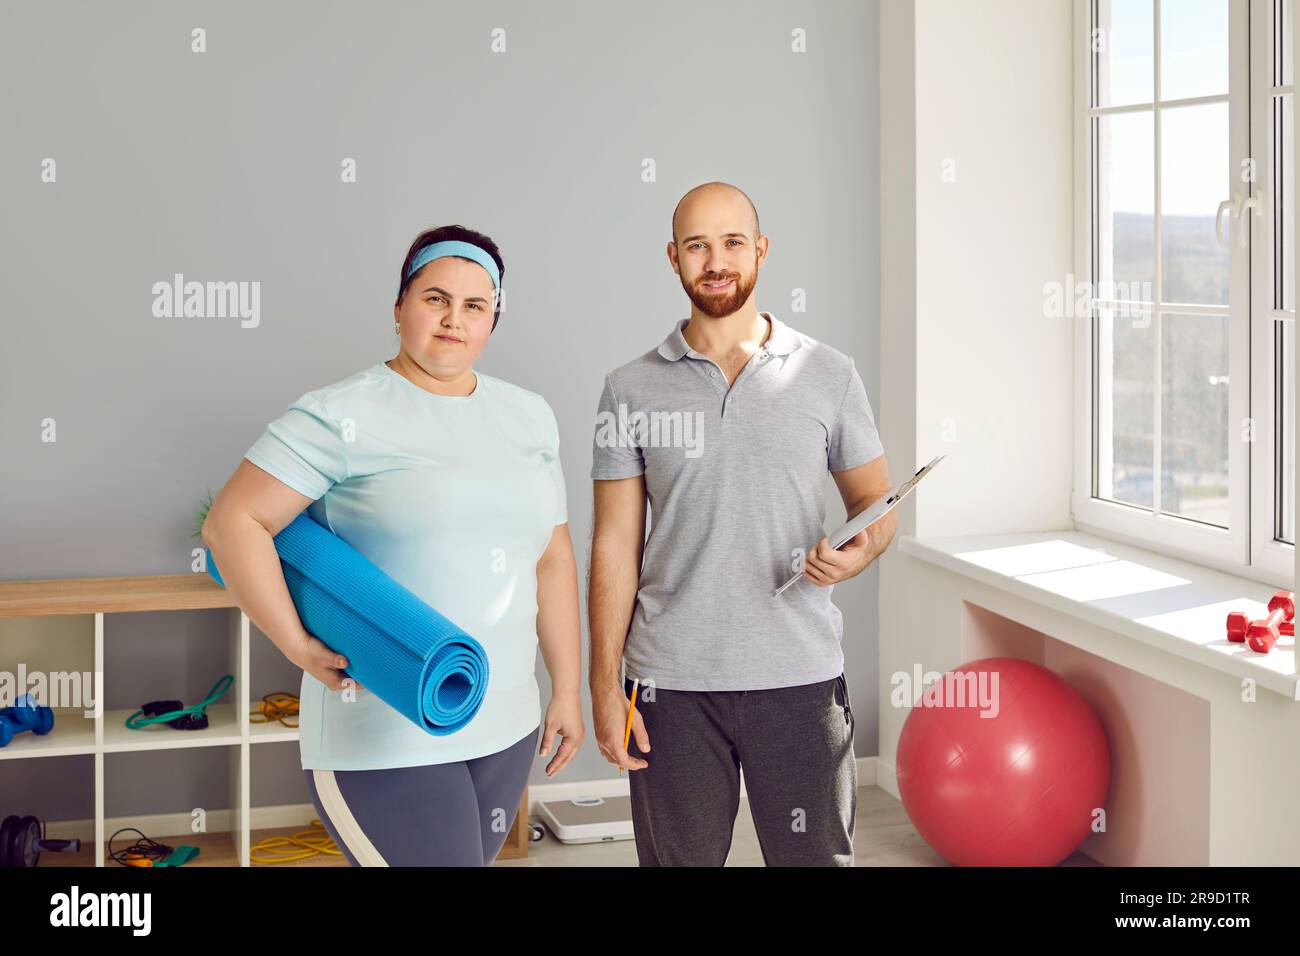 Fat young woman standing with a male young nurse and looking at the camera. Stock Photo